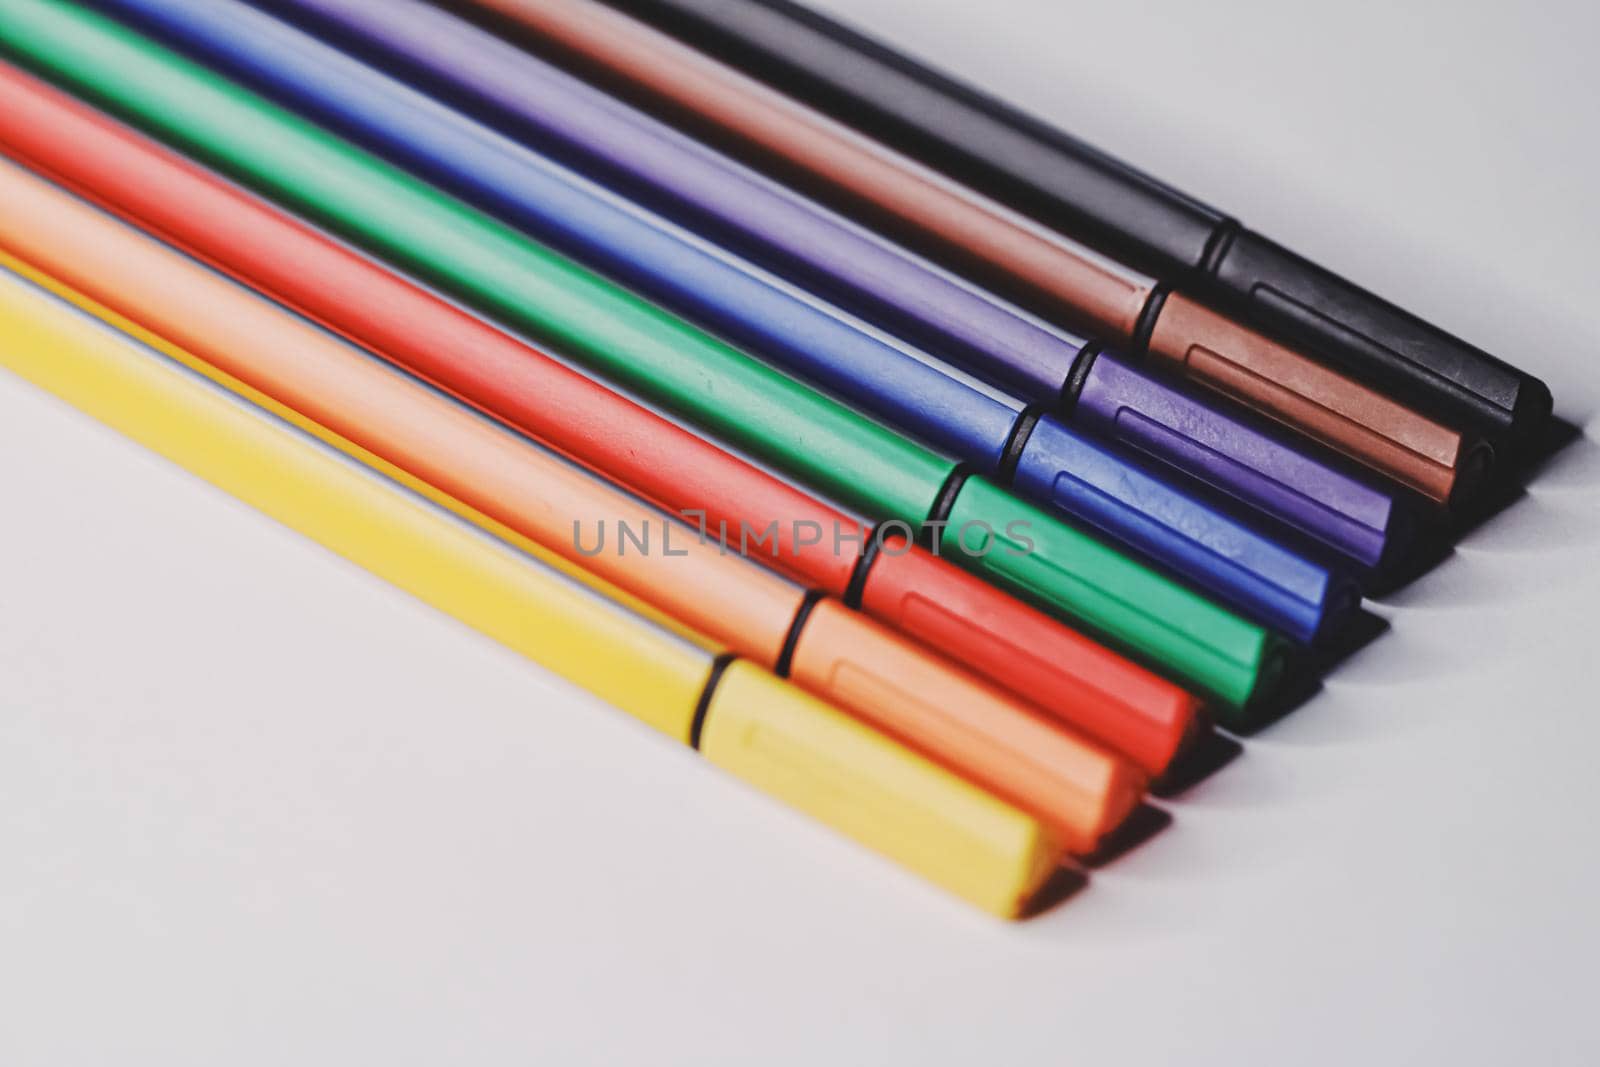 Colourful felt-tip pens for drawing by Anneleven